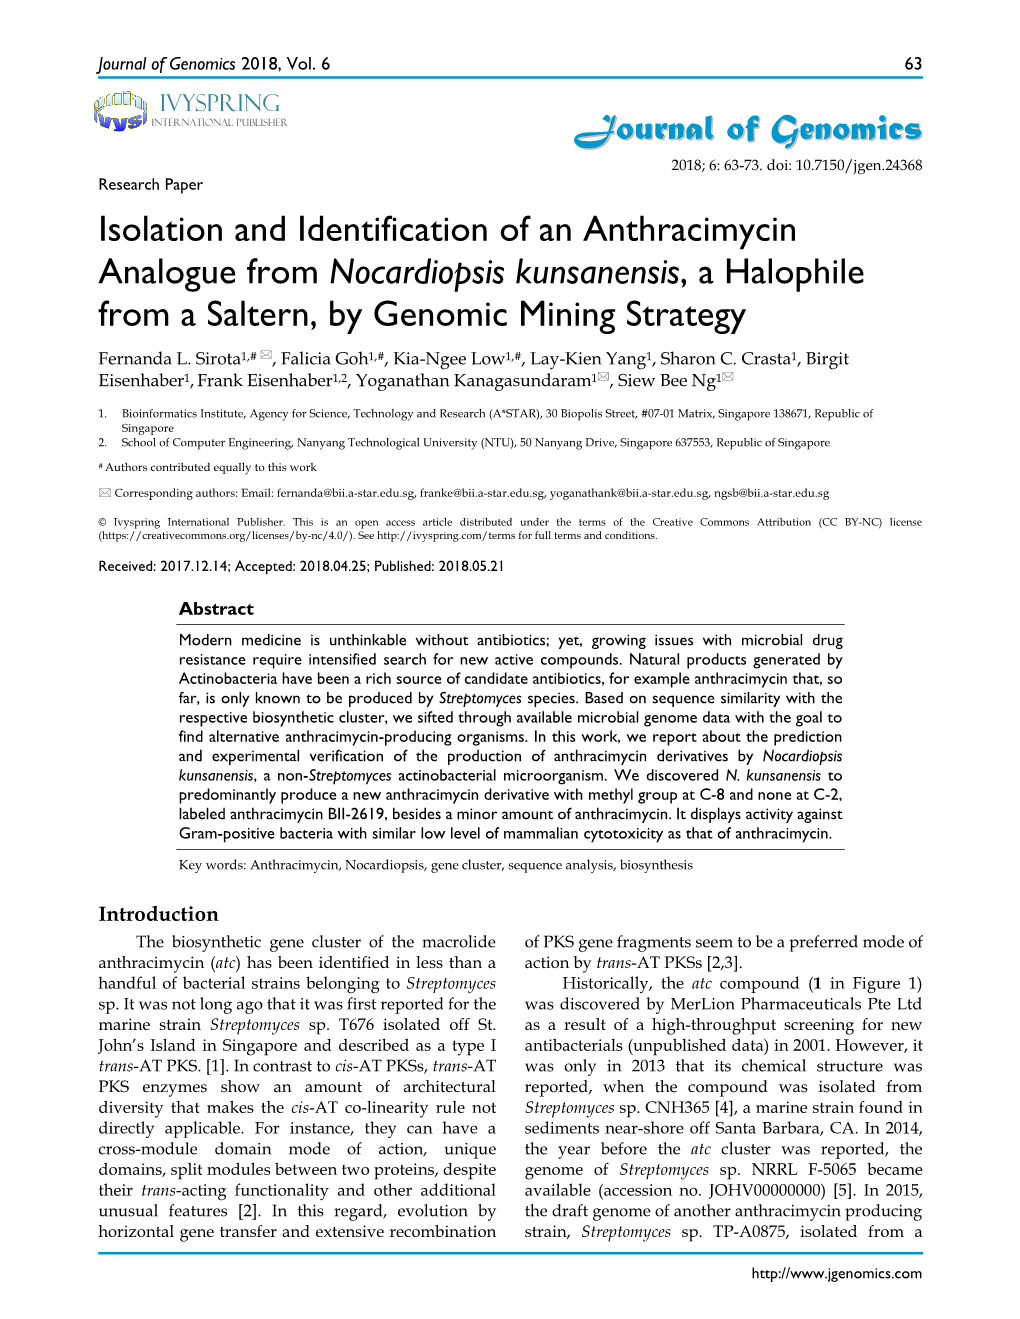 Journal of Genomics Isolation and Identification of an Anthracimycin